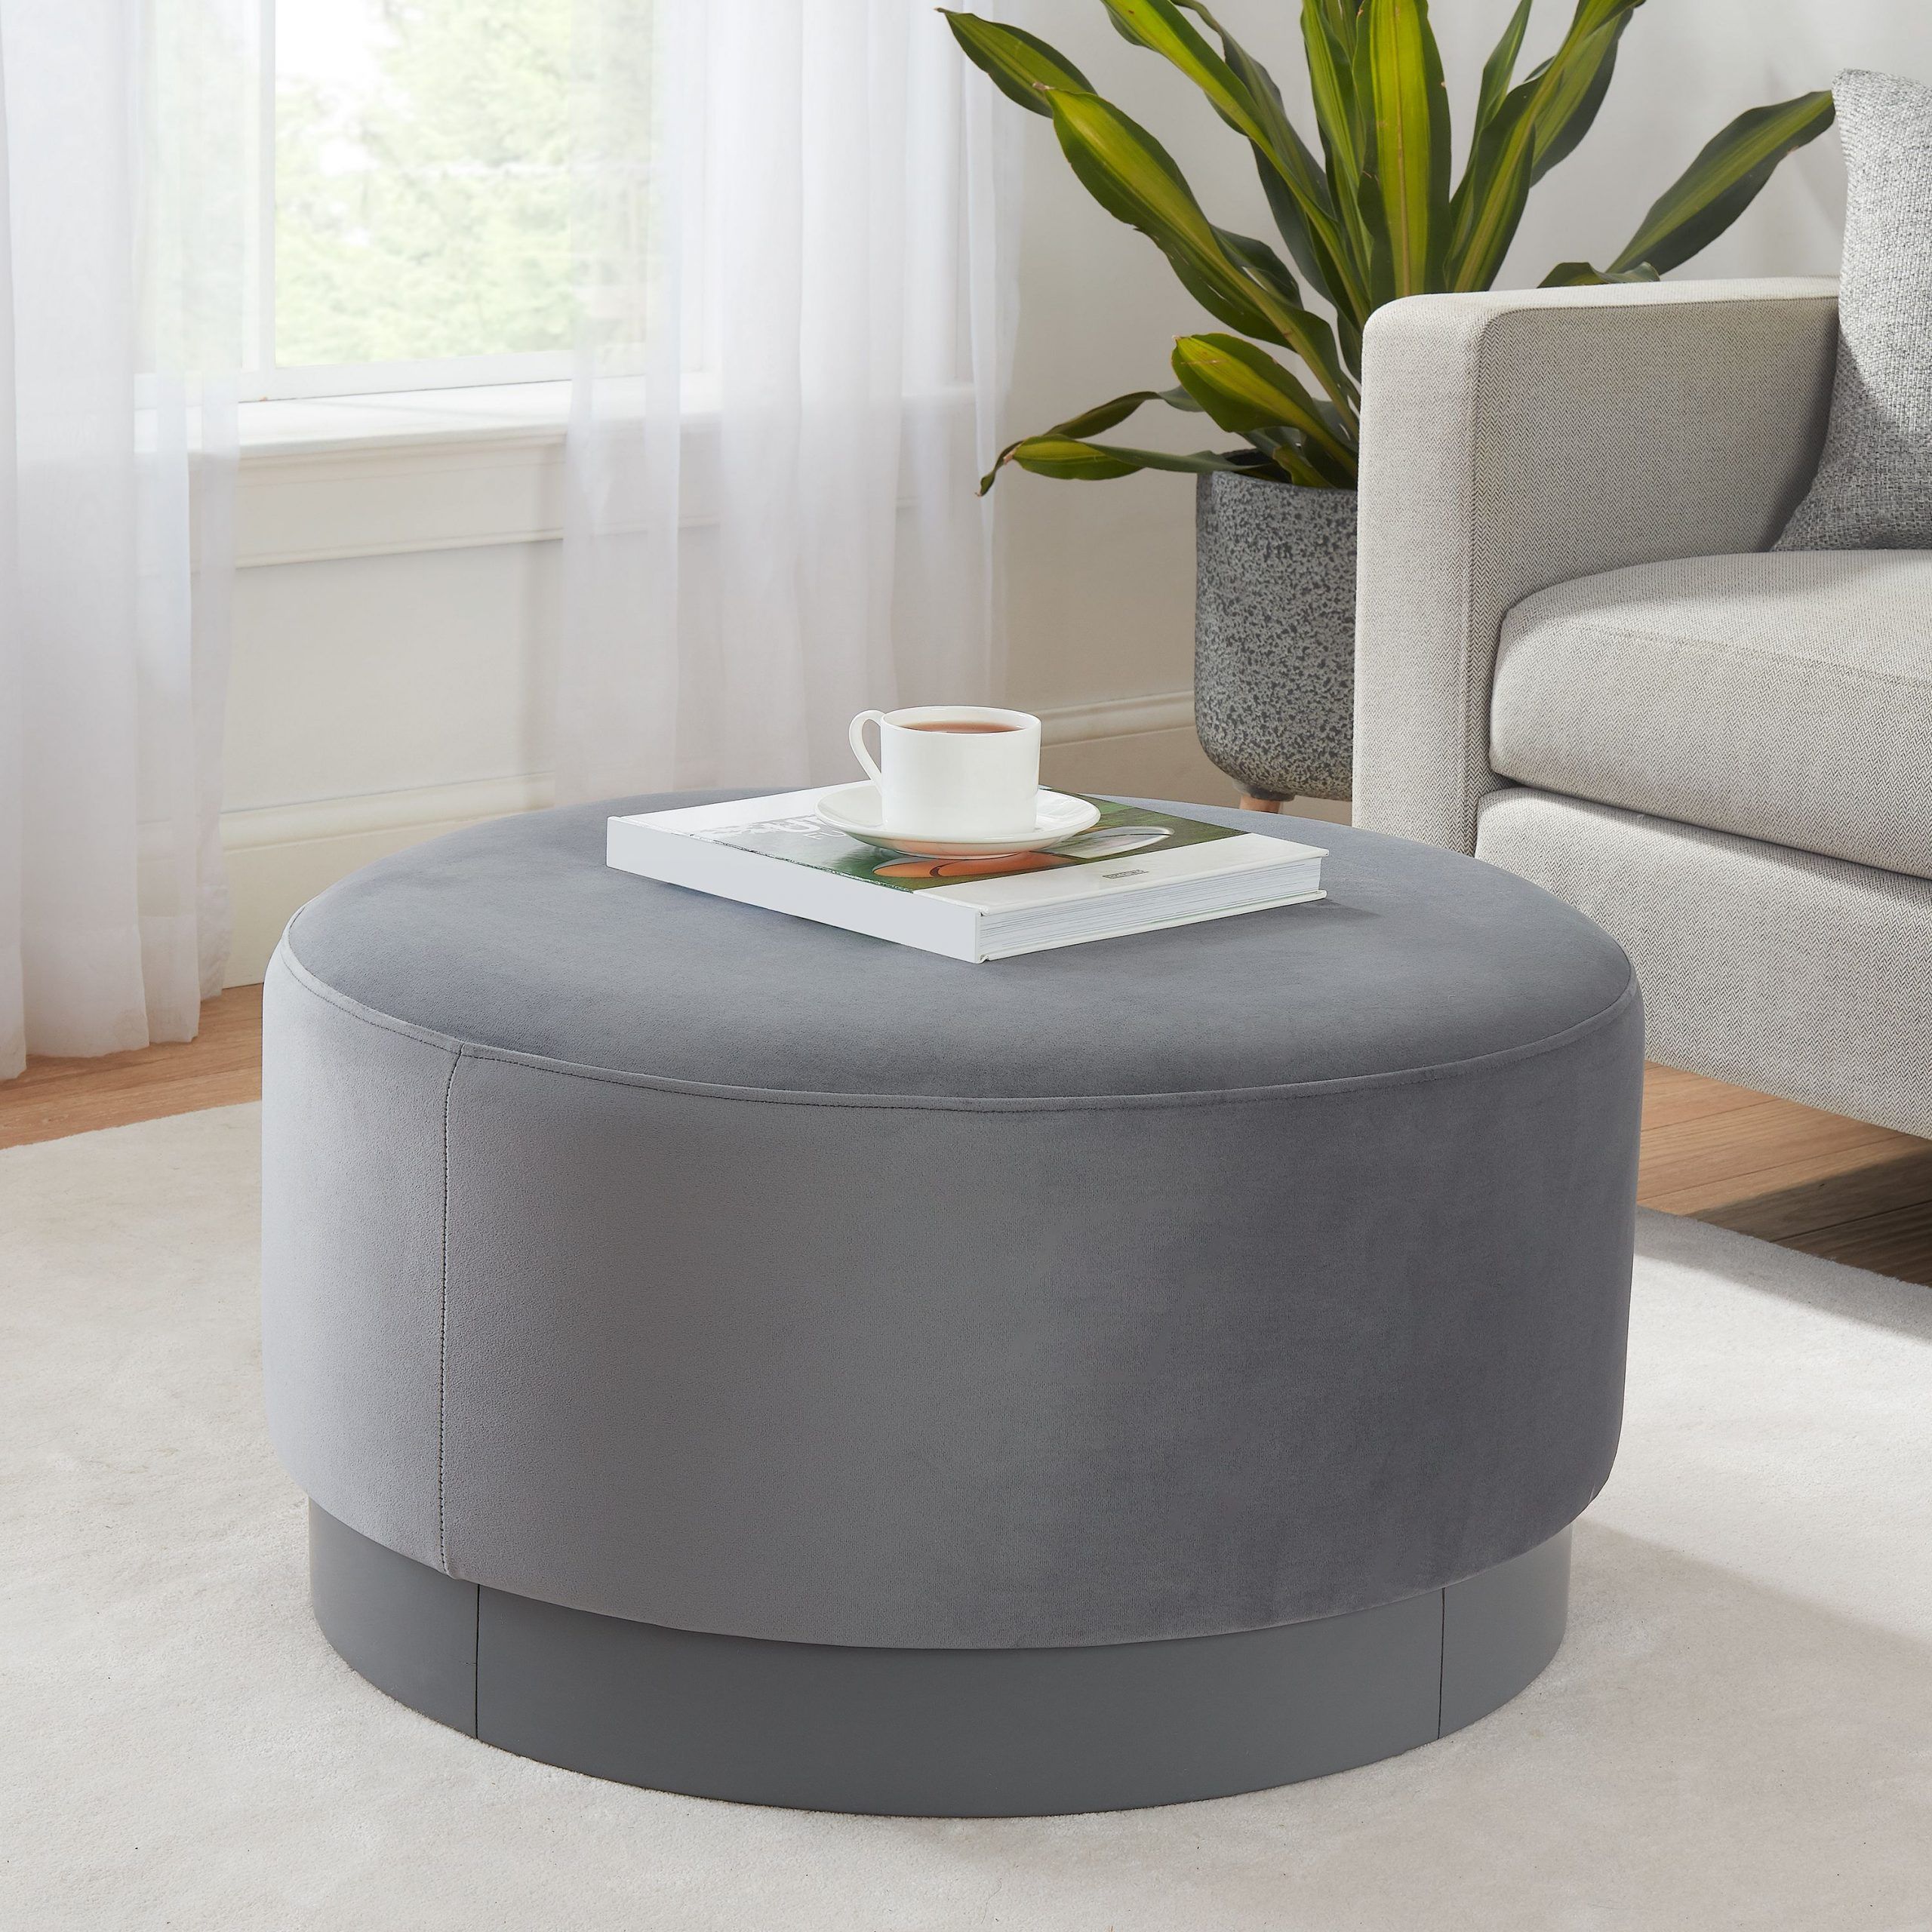 Better Homes & Gardens Addison Large Round Ottoman, Multiple Colors Pertaining To Wool Round Pouf Ottomans (View 6 of 20)